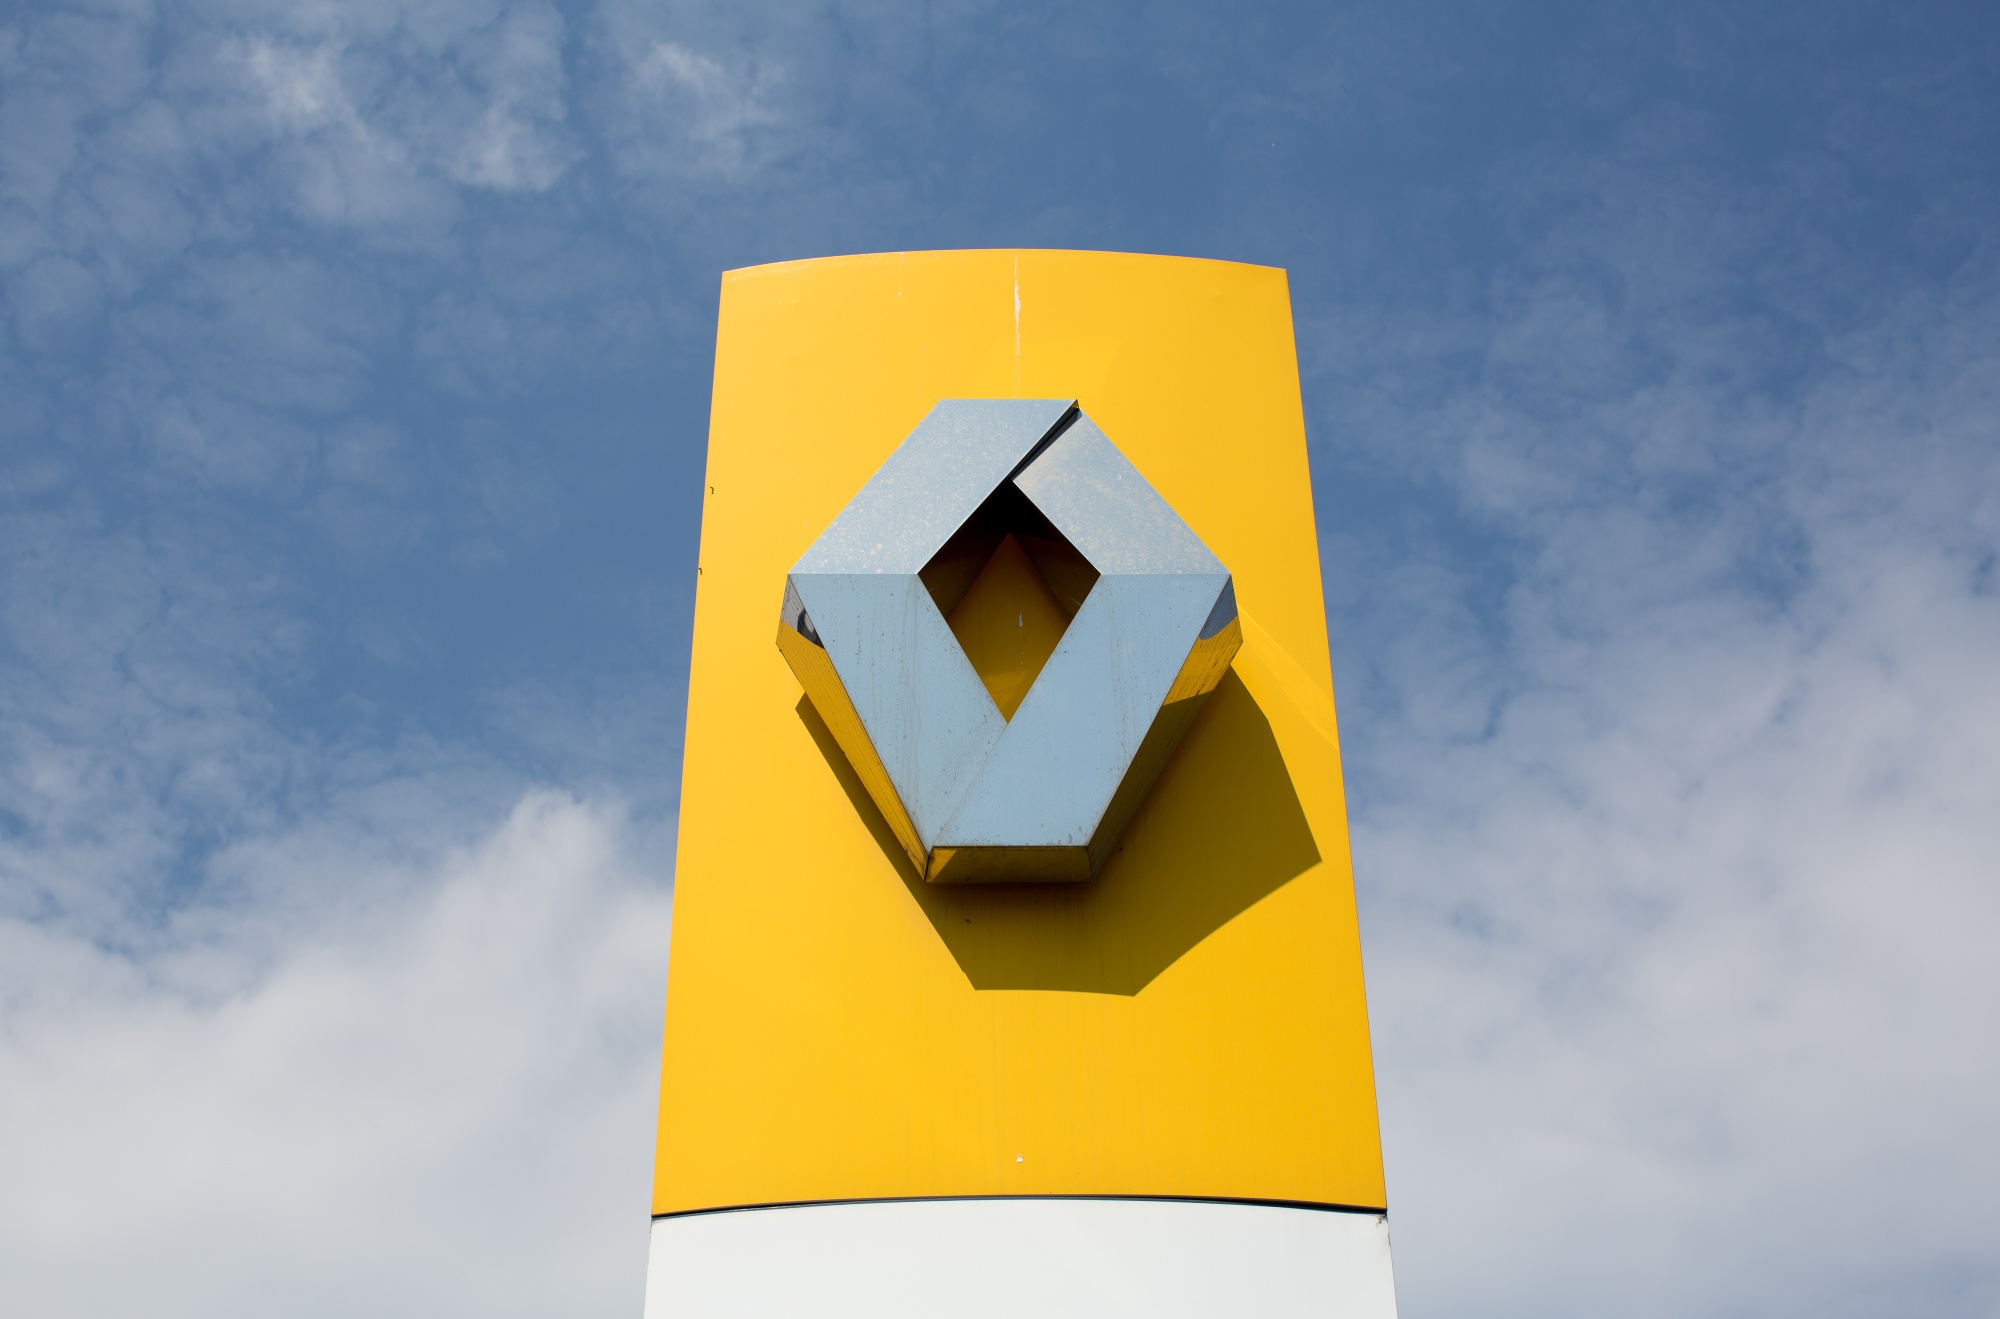 A logo sits on display outside the Renault SA automobile assembly plant in Moscow, Russia, on Tuesday, May 28, 2019. A prospective deal proposed by Fiat Chrysler Automobiles NV to merge with Renault could create the world's third-biggest carmaker.